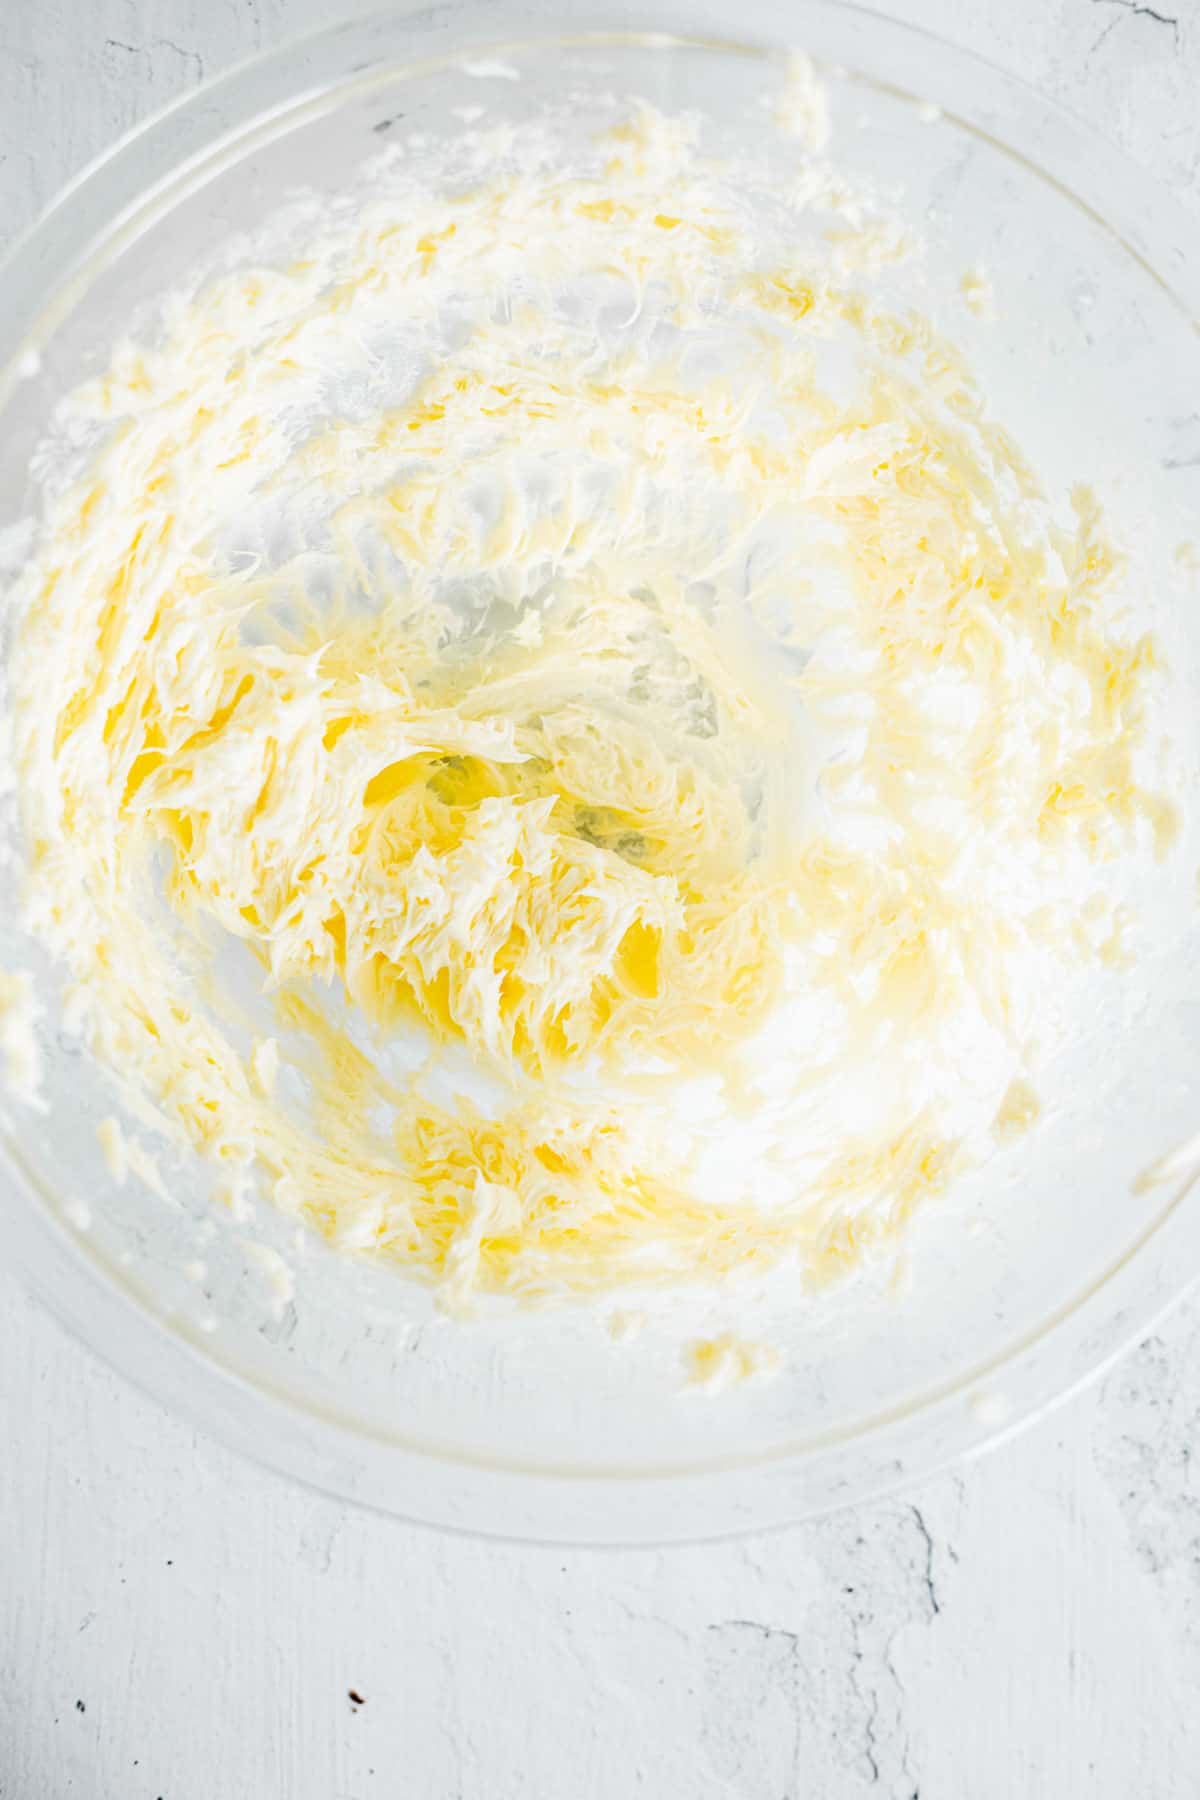 whipped butter in a glass bowl.